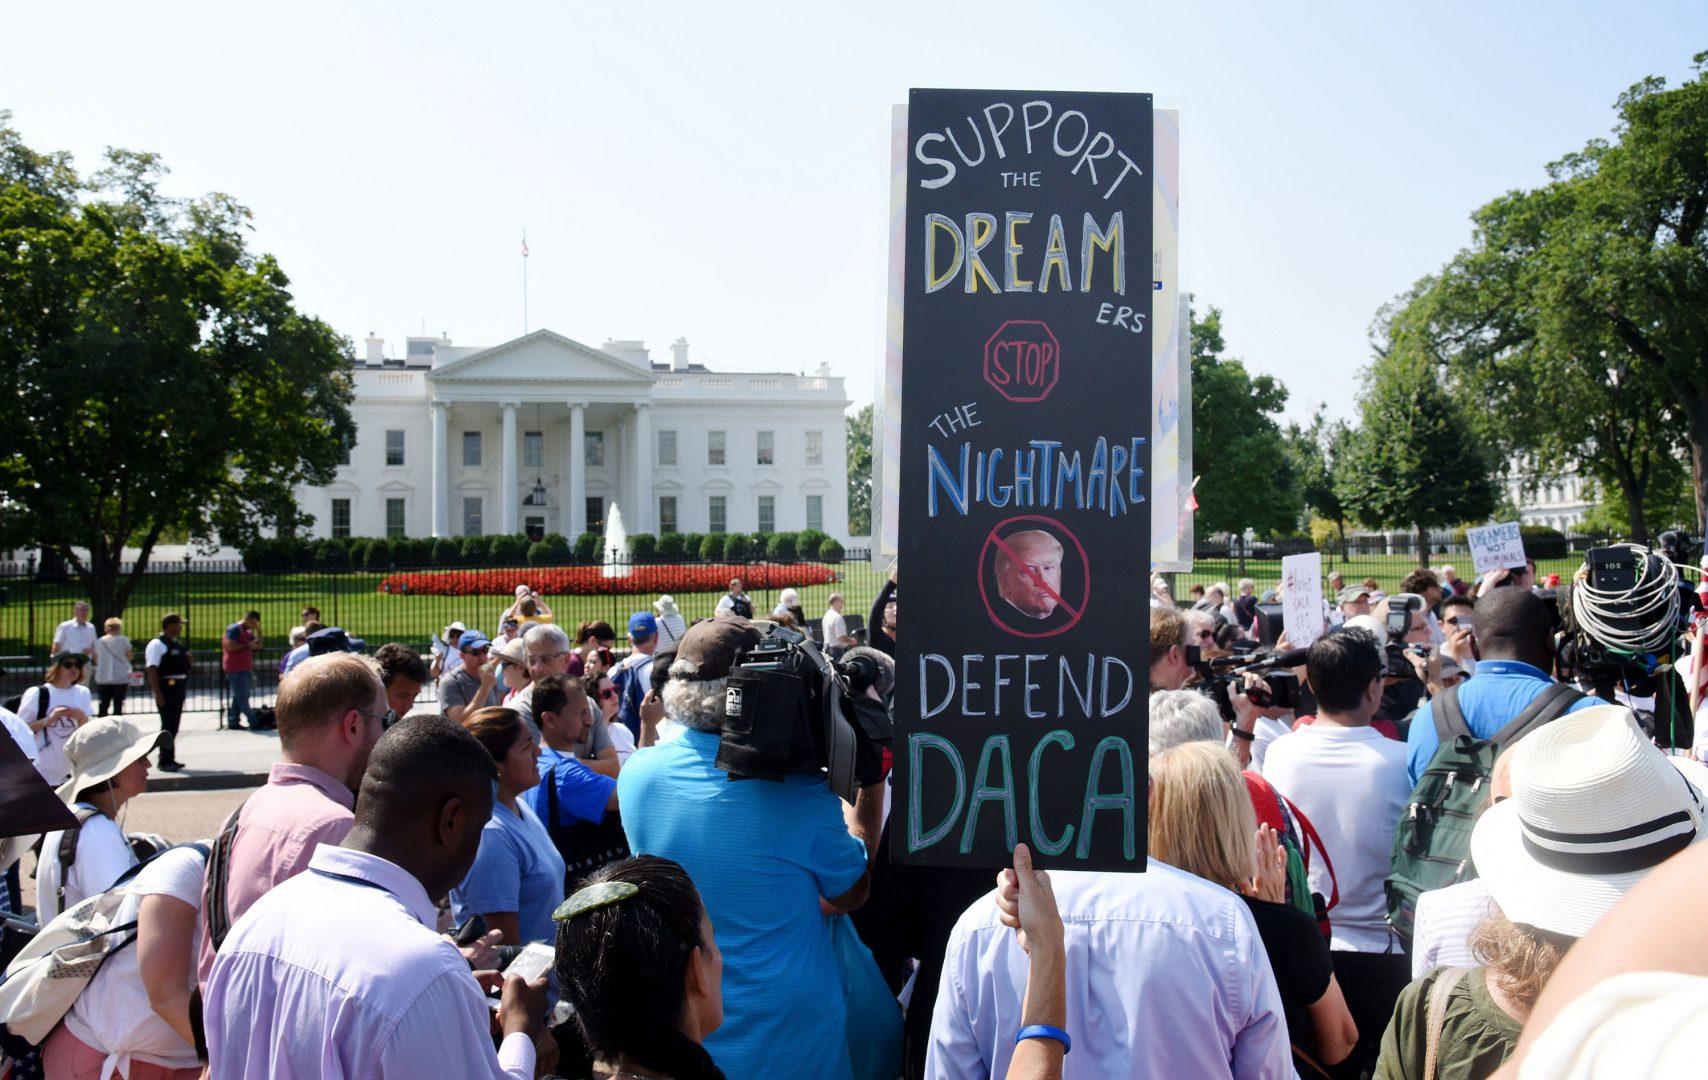 Protesters hold up signs during a rally supporting Deferred Action for Childhood Arrivals, or DACA, outside the White House on September 5, 2017. Federal immigration authorities have resumed accepting requests for renewals in DACA, the Obama administration program that shielded hundreds of thousands of young immigrants from being deported. (Olivier Douliery/Abaca Press/TNS)